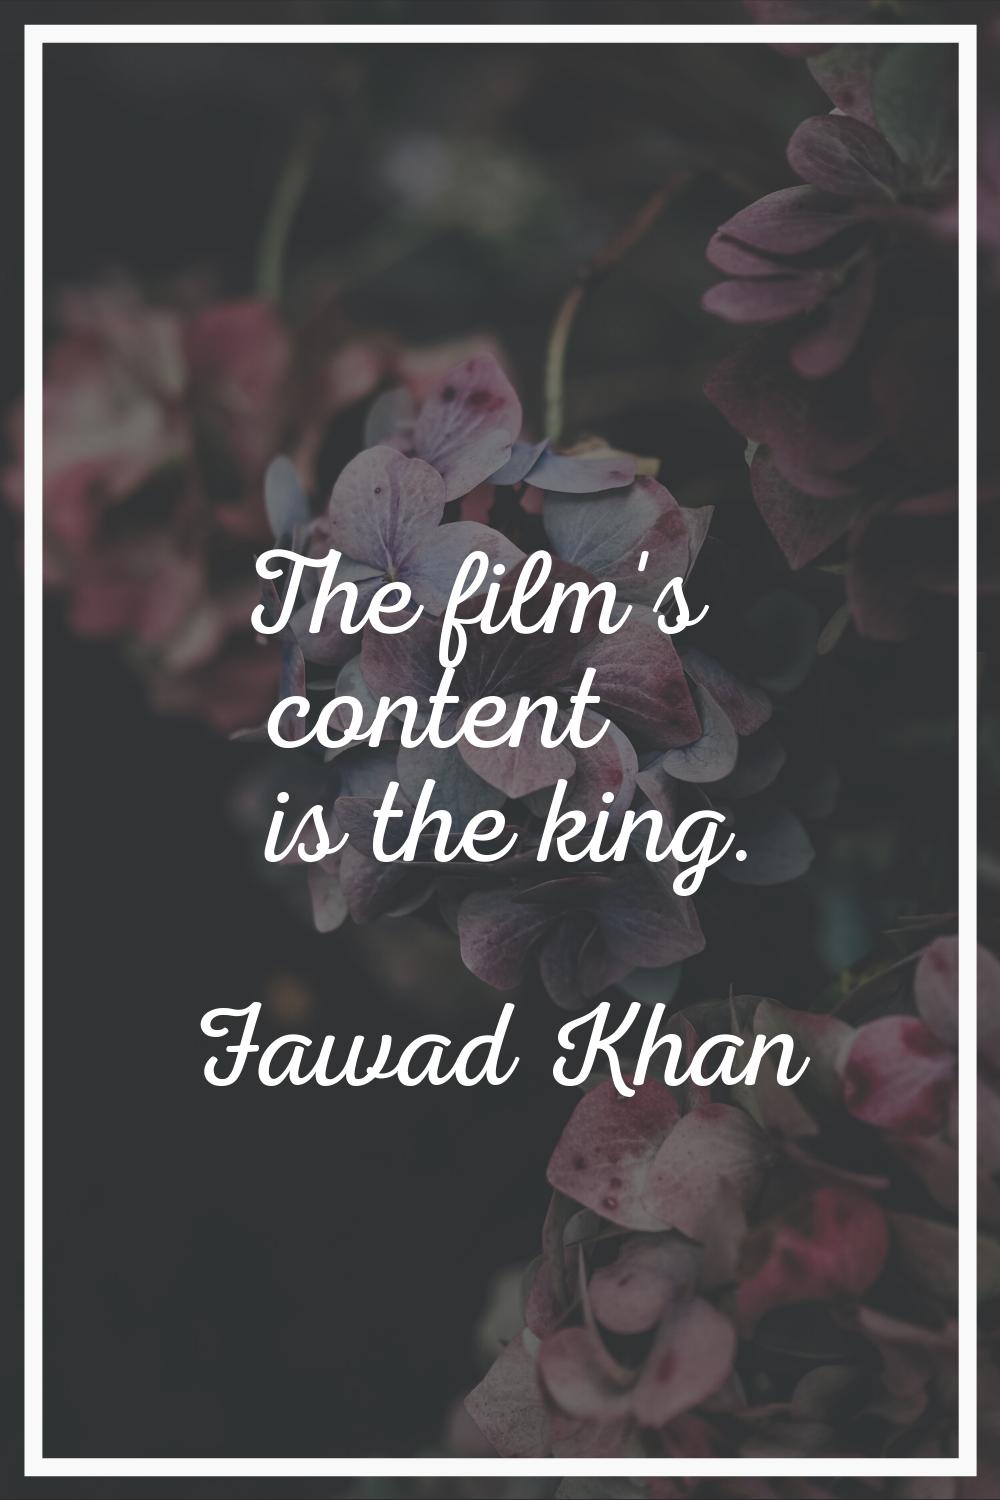 The film's content is the king.